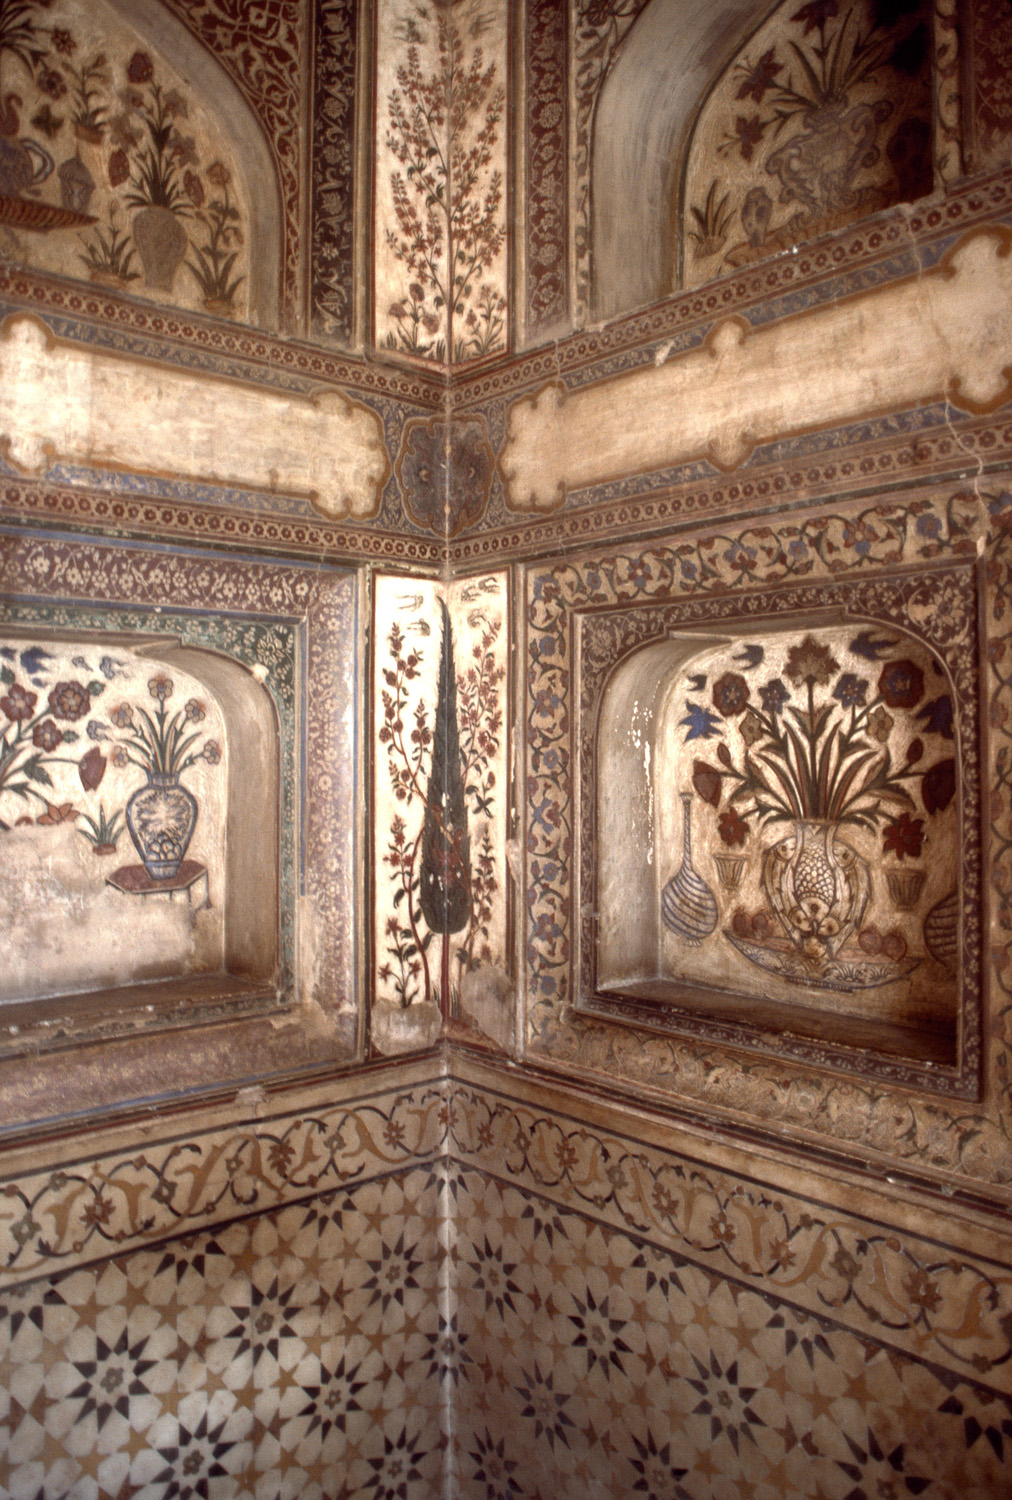 Mausoleum of I'timad al-Daula - Interior view, detail of wall painting